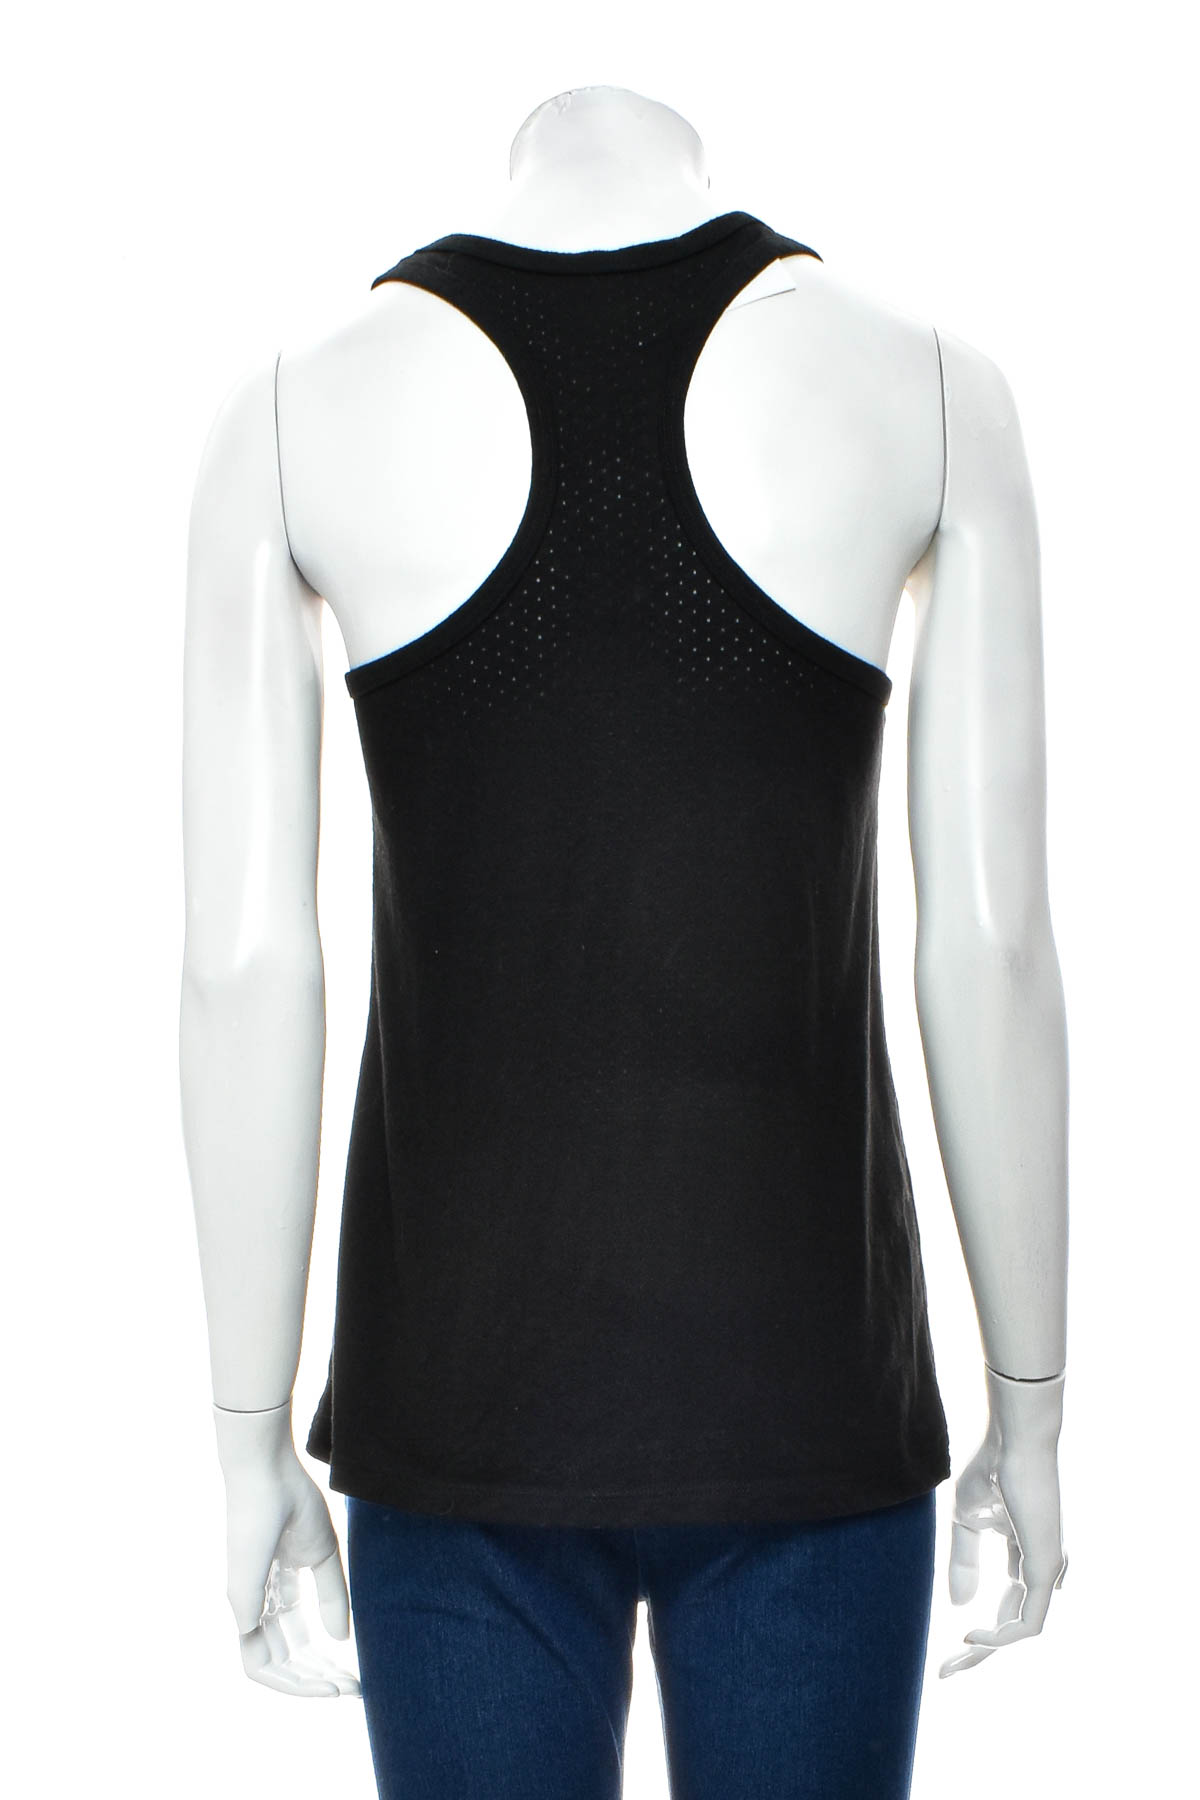 Women's top - Athletic Works - 1